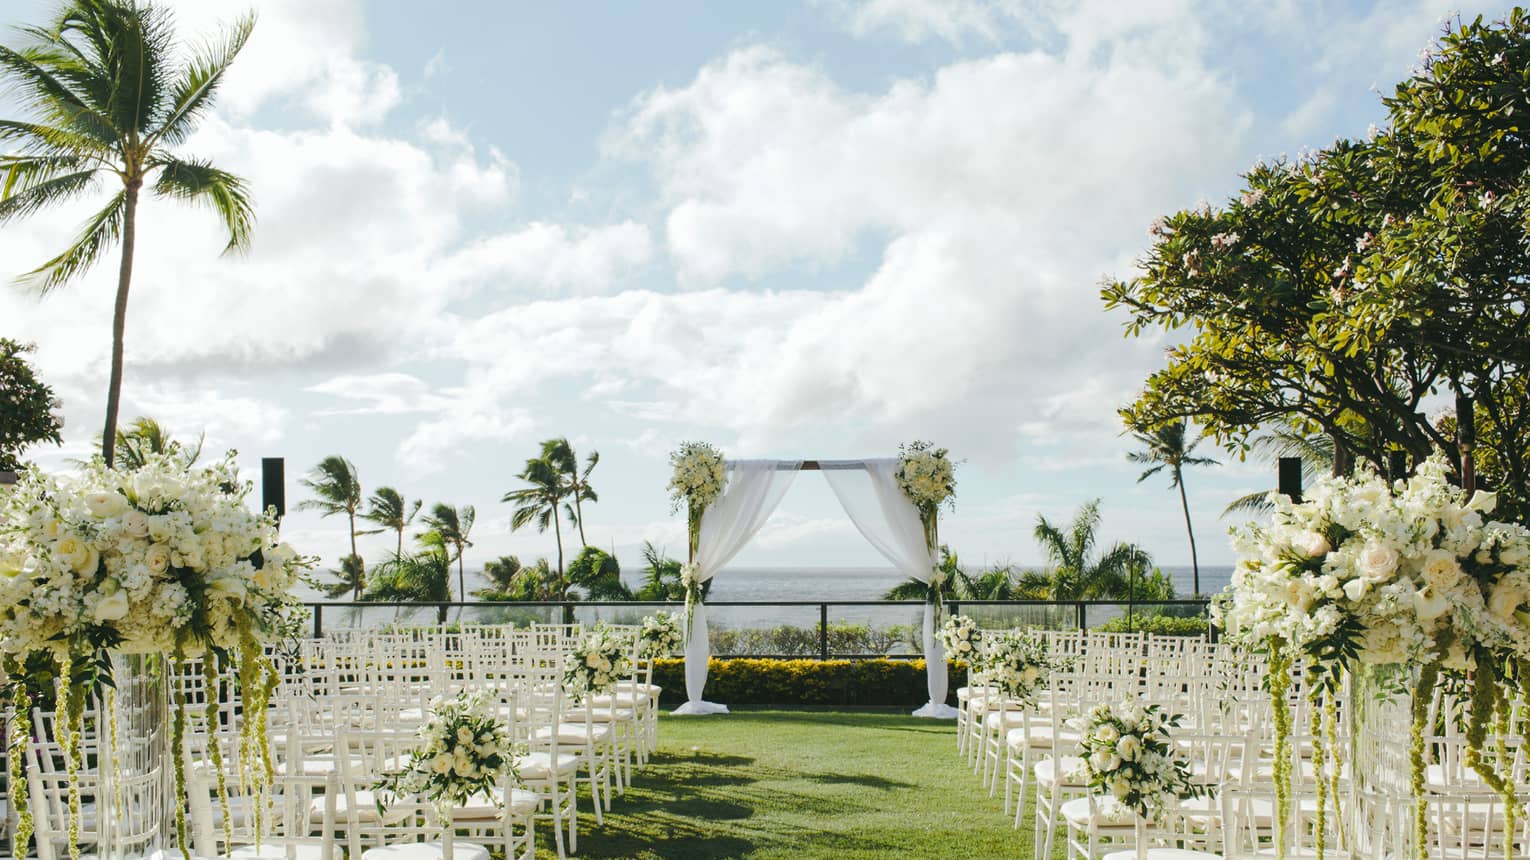 Outdoor wedding ceremony set up, rows of white chairs face altar on event lawn near ocean